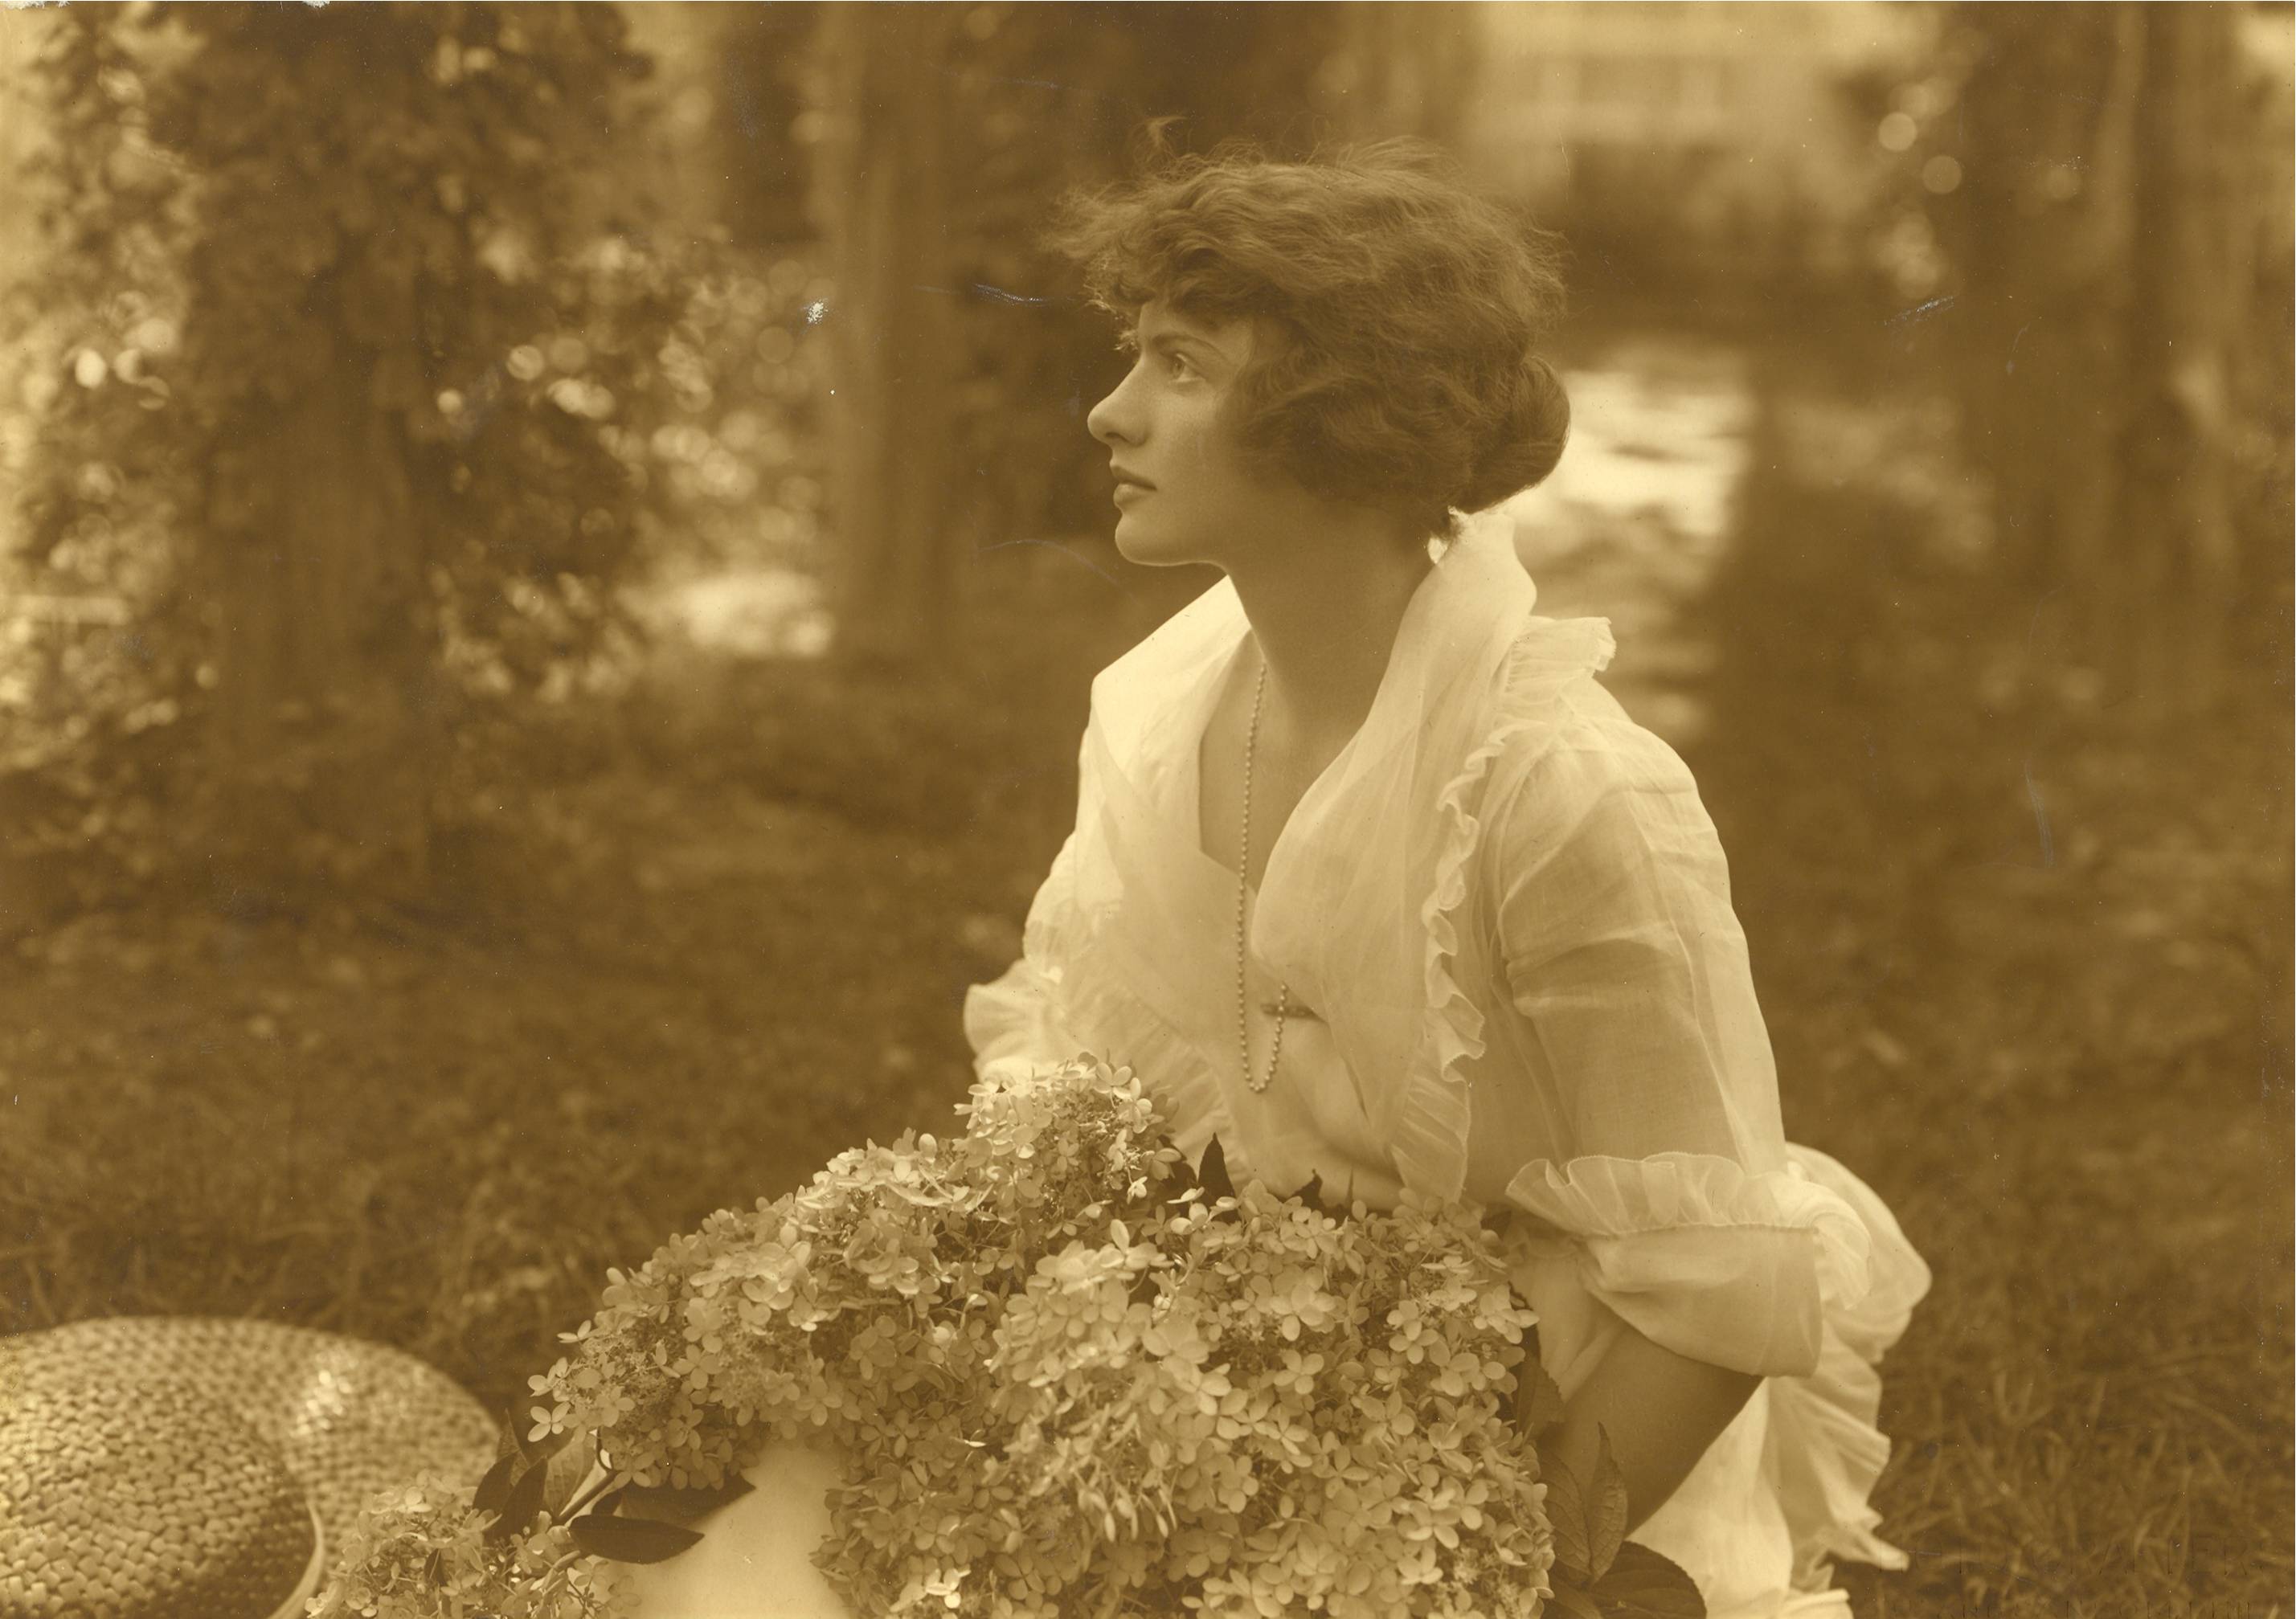 A profile of young woman holding an enormous bouquet and wearing a light-weight white blouse.